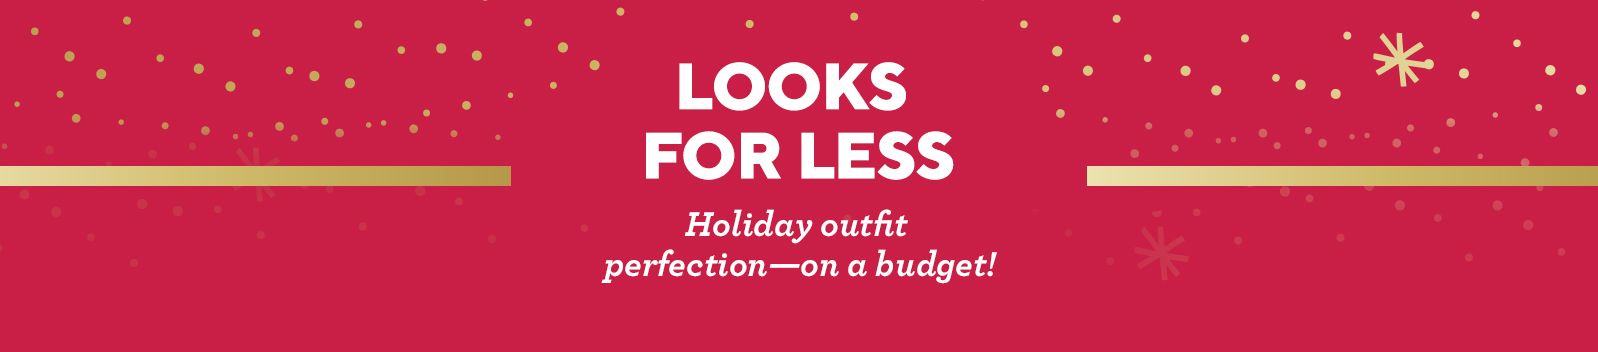 Looks for Less  Holiday outfit perfection (on a budget!)